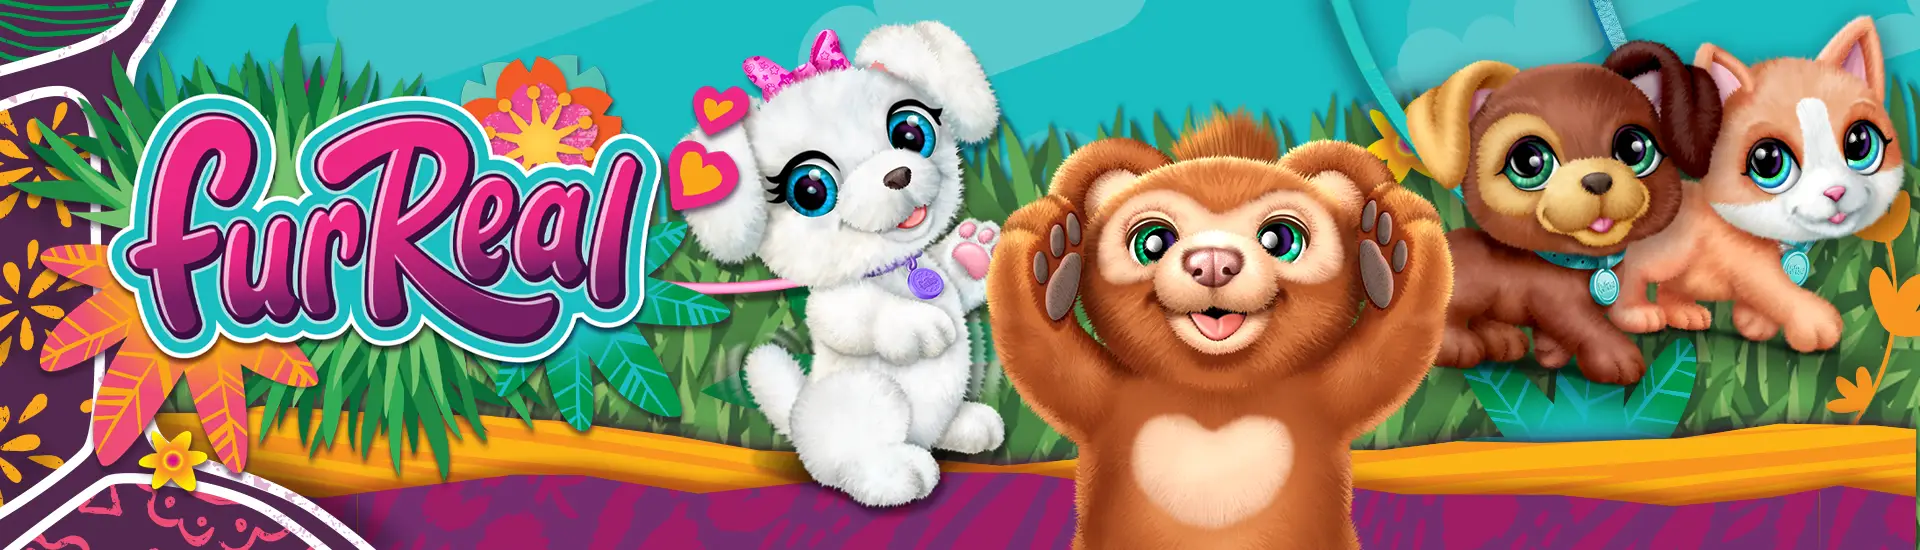 FurReal friends Cubby, l'ours curieux